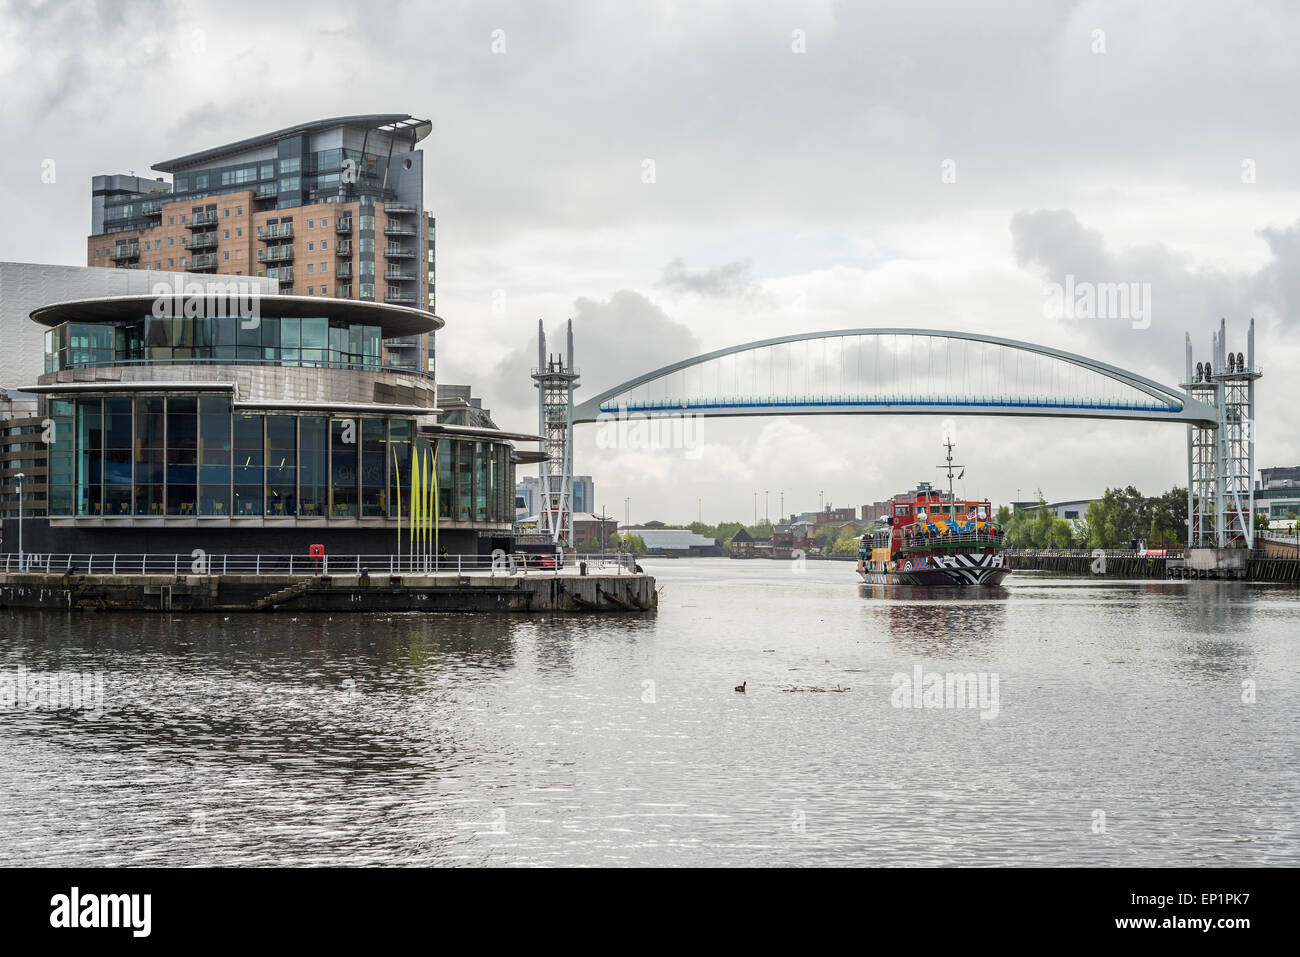 The Lowry Centre Salford Quays. The Mersey ferry Snowdrop painted in Dazzle camouflage. Stock Photo